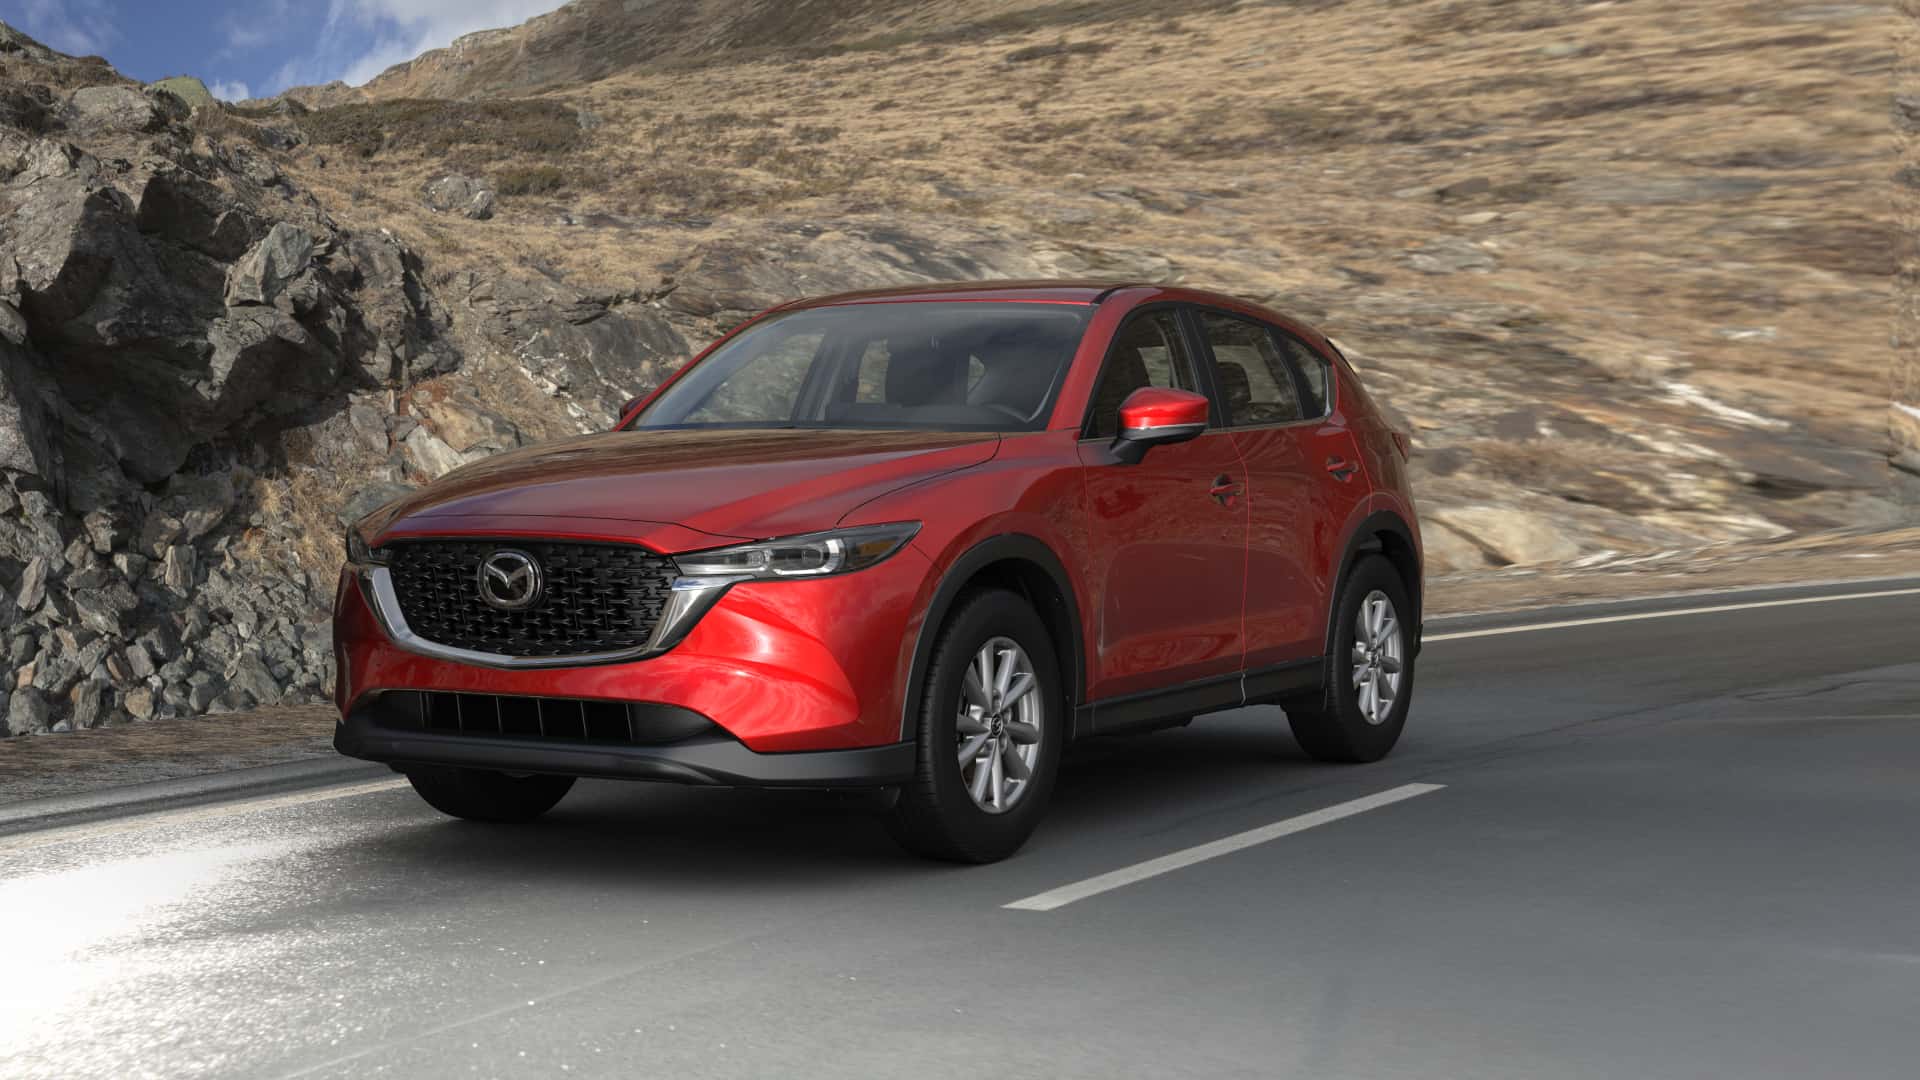 2023 Mazda CX-5 2.5 S Soul Red Crystal Metallic | Mazda of South Charlotte in Pineville NC